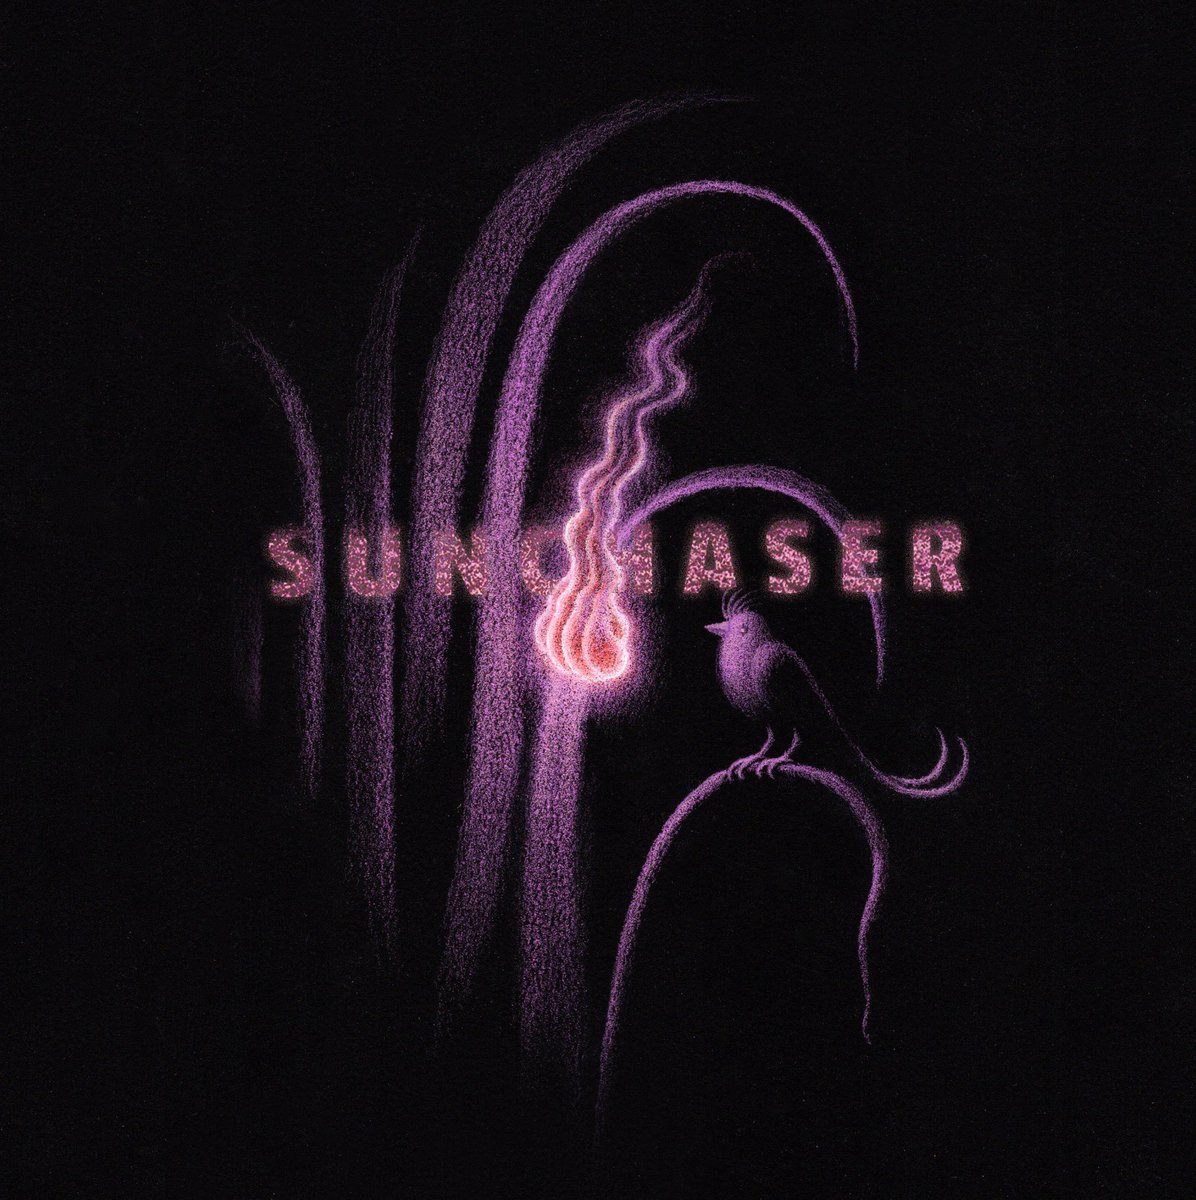 We are back! Our new song Sunchaser is out everywhere now ☀️🏃🏽

Handy Listen Link | bit.ly/SunchaserDS

Suffice to say that we’re very excited to release Sunchaser into the world and we can’t wait to play it for you all live on tour starting next week! 🇺🇸🫶

Love 
DS x